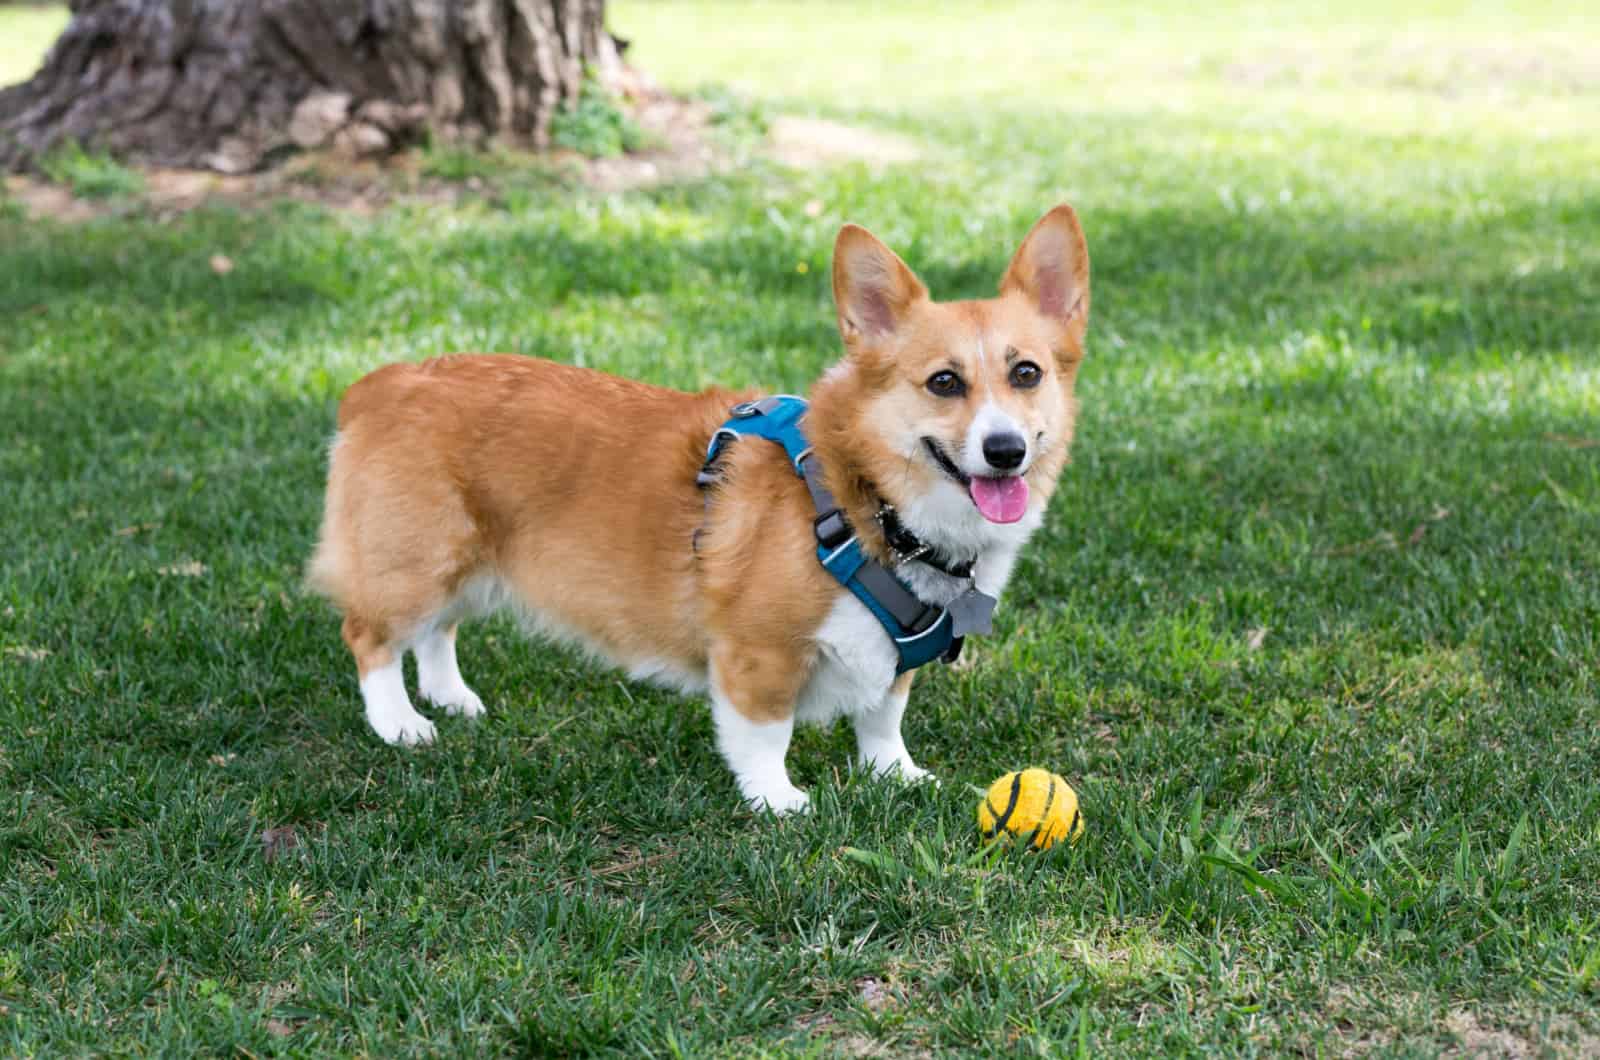 corgi wearing a harness and playing with ball